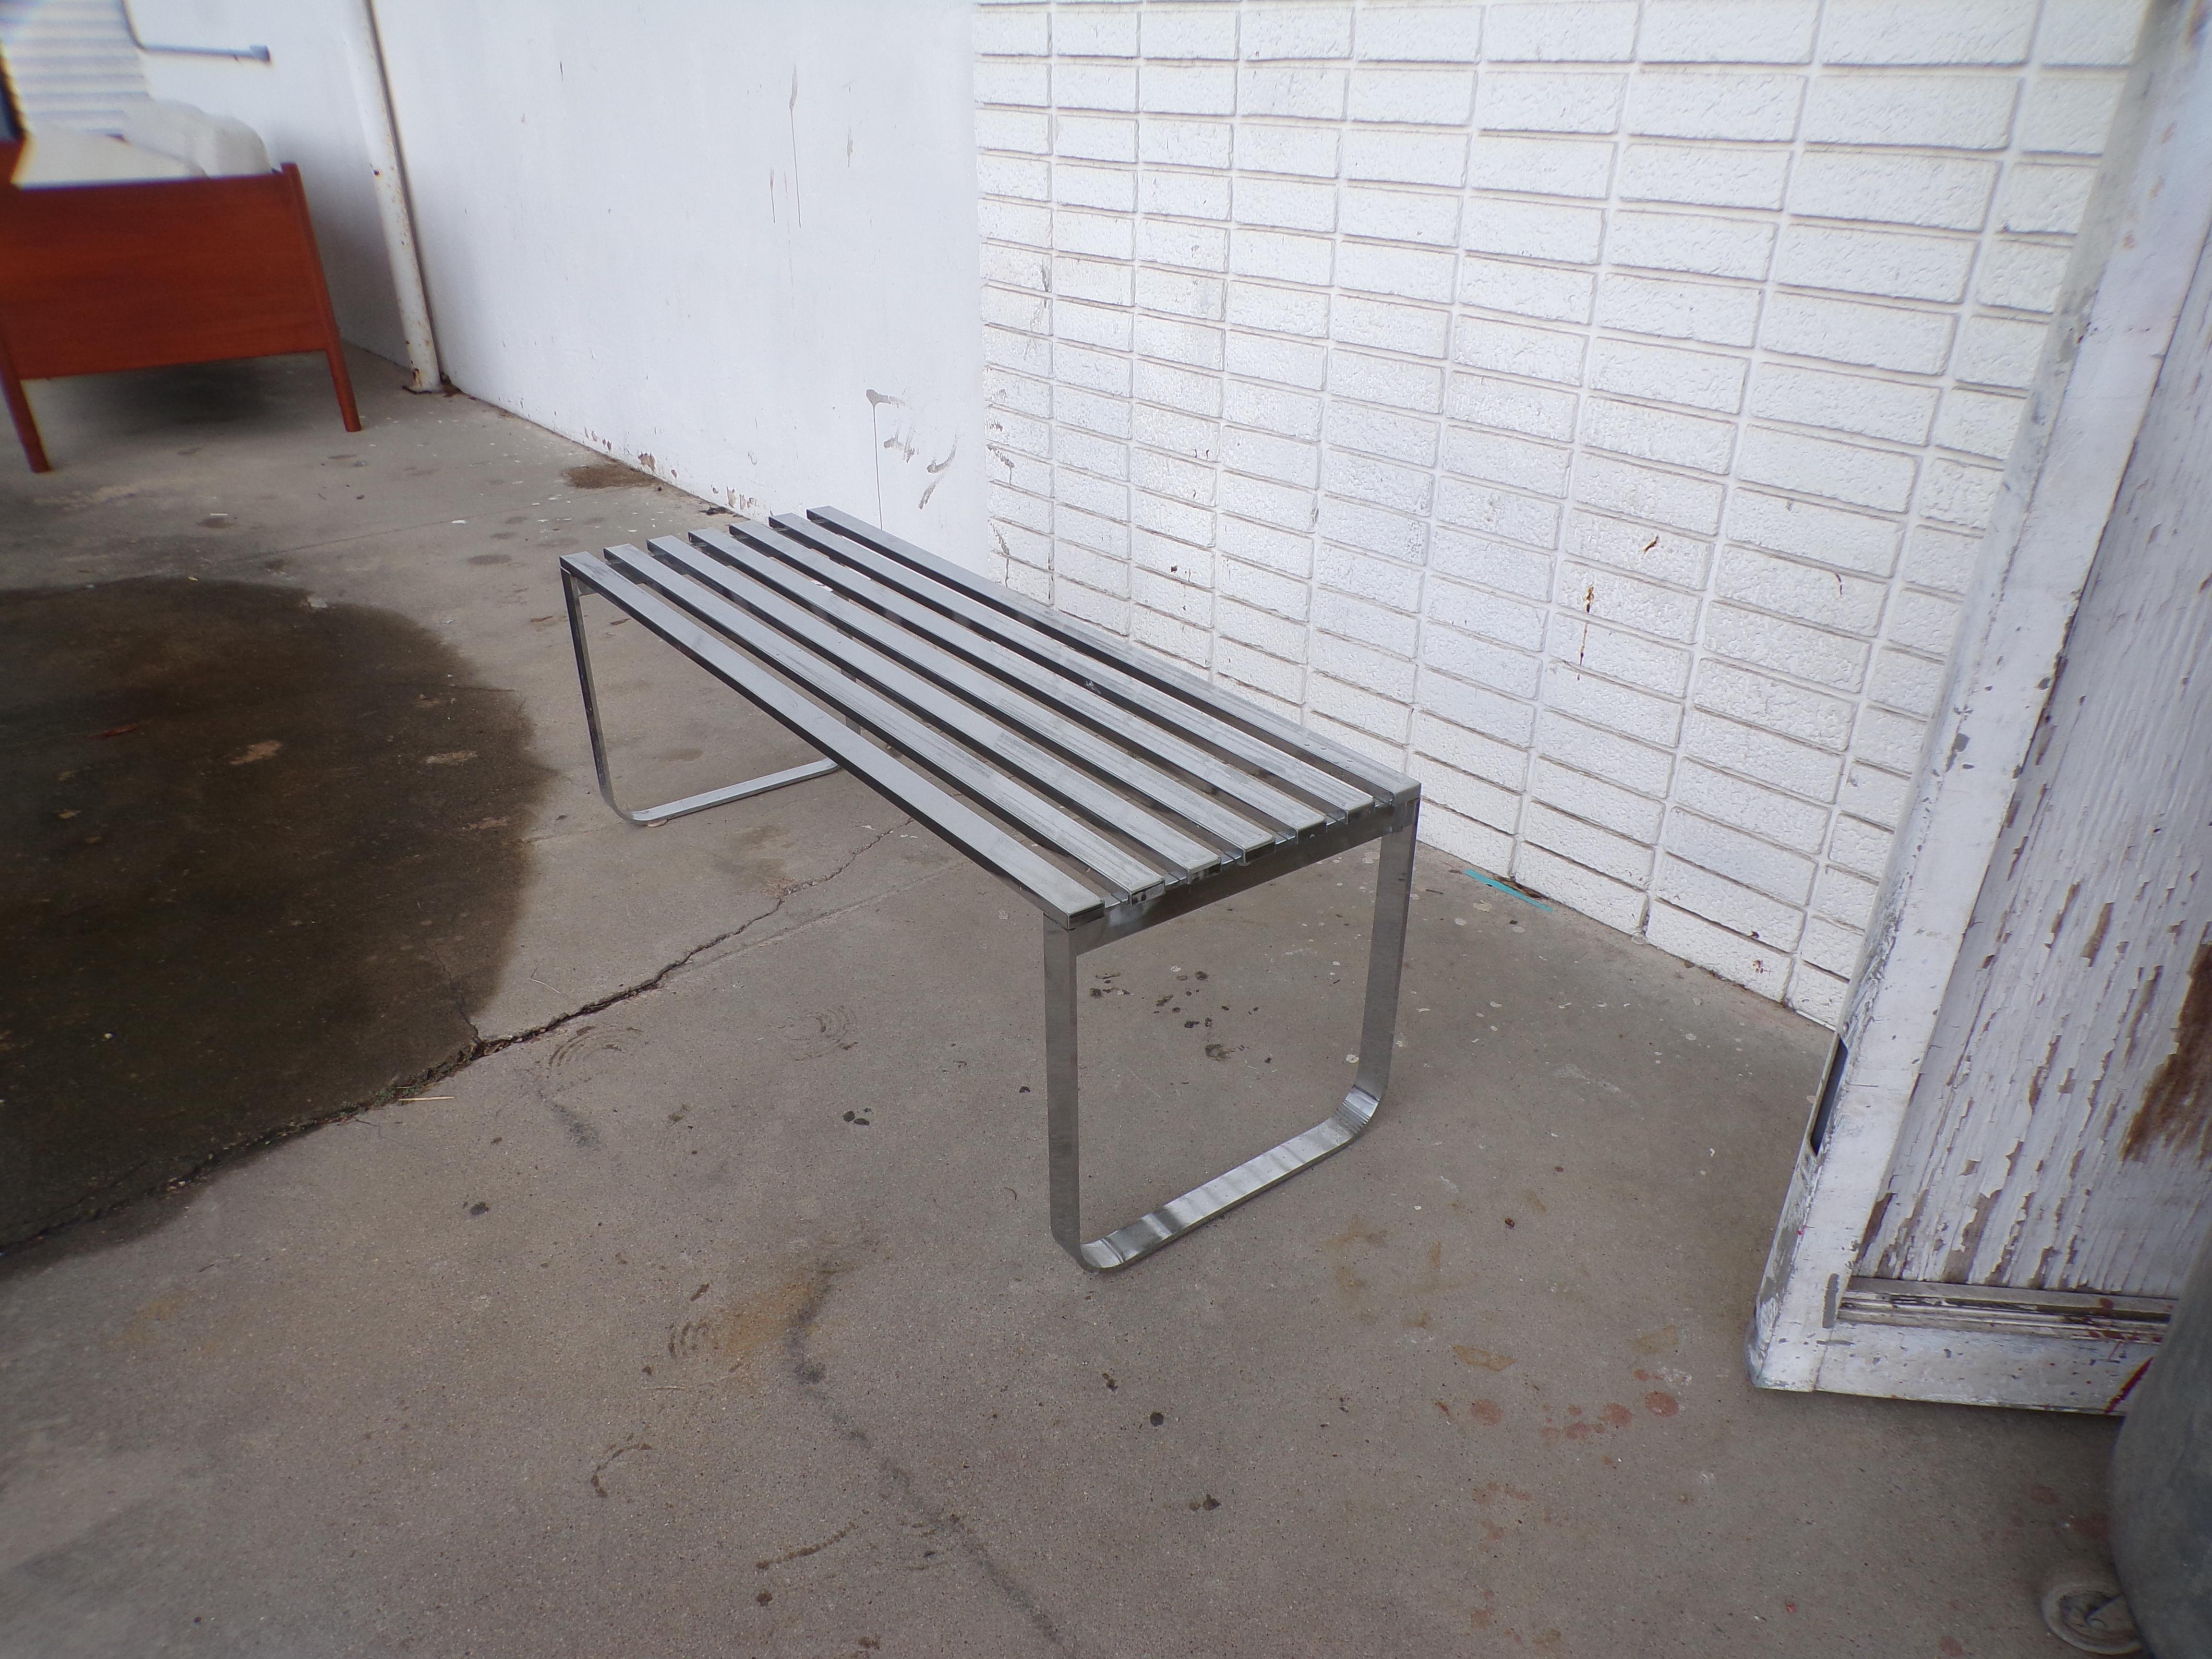 Design Institute of America Chrome Slat Bench

Designed in the 1970s, this slatted chrome bench is simple and classic.

